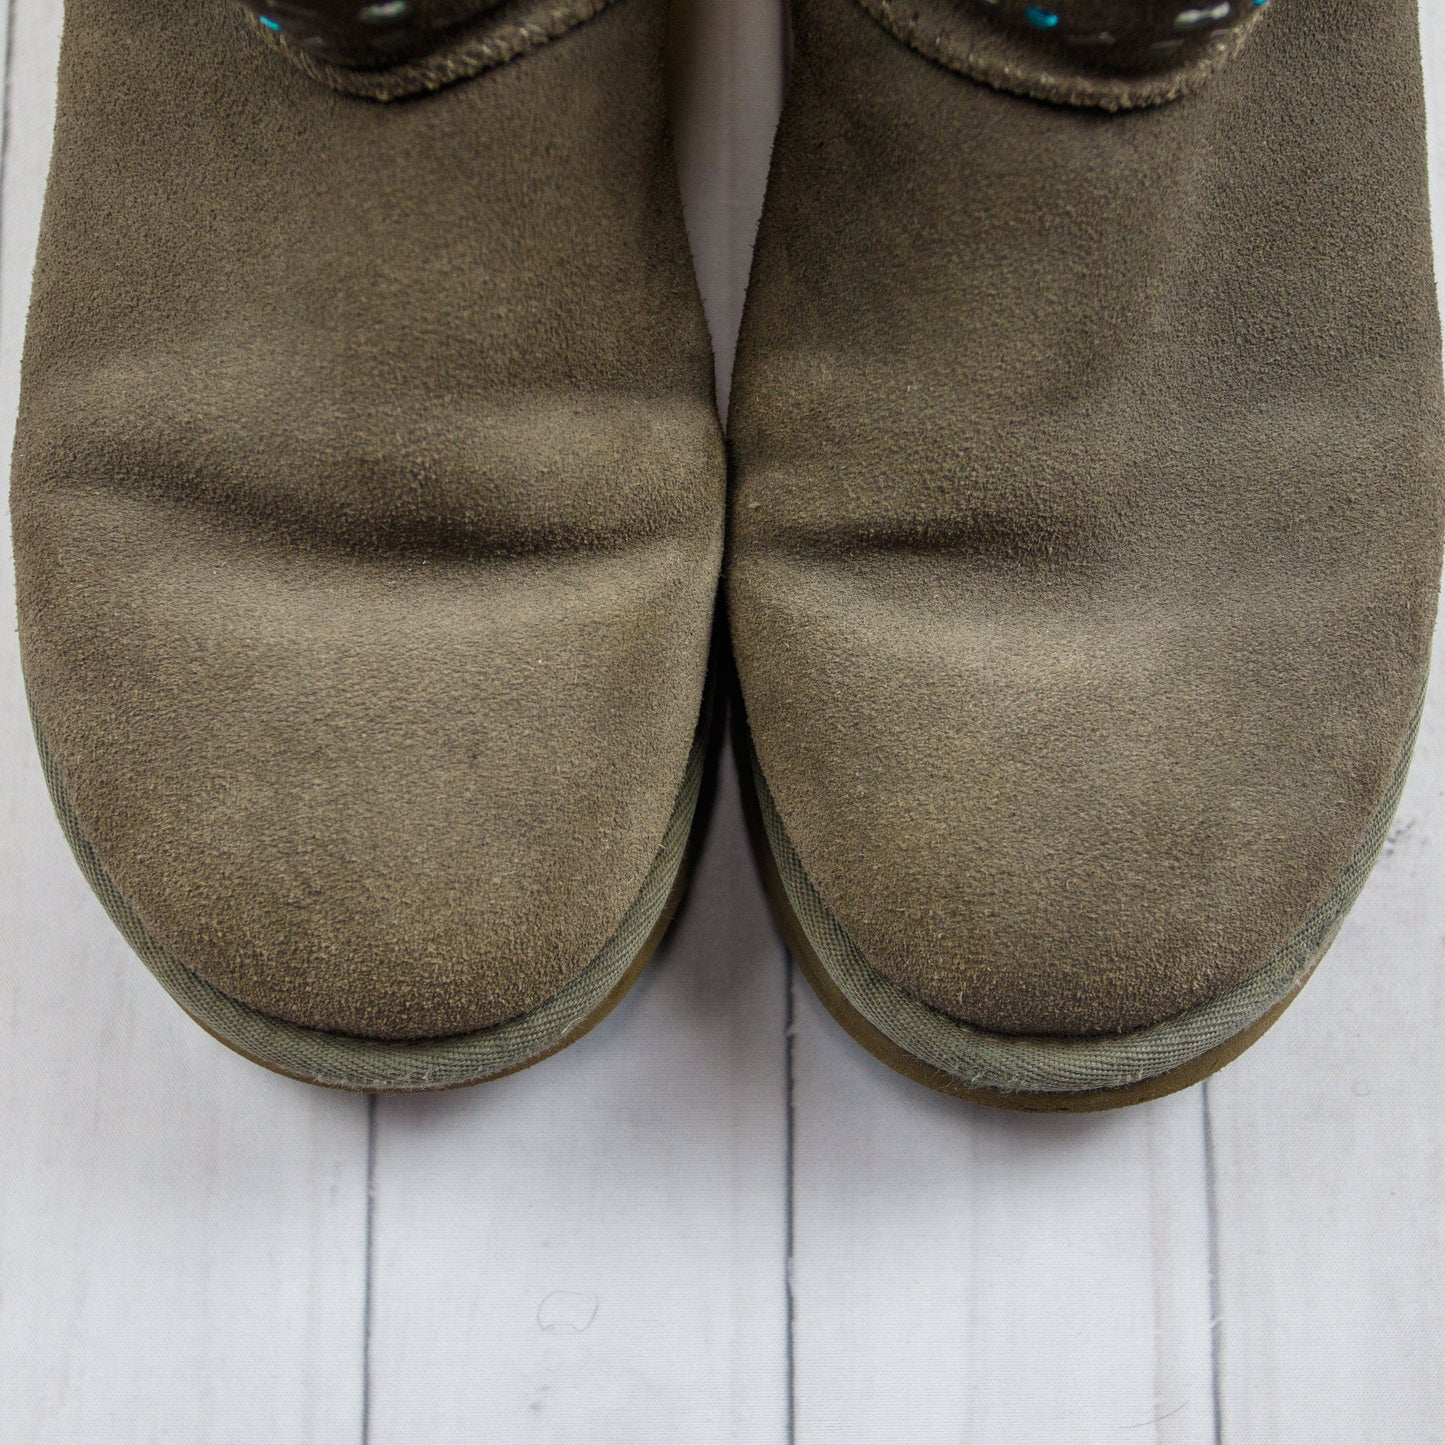 Boots Ankle Flats By Ugg  Size: 10